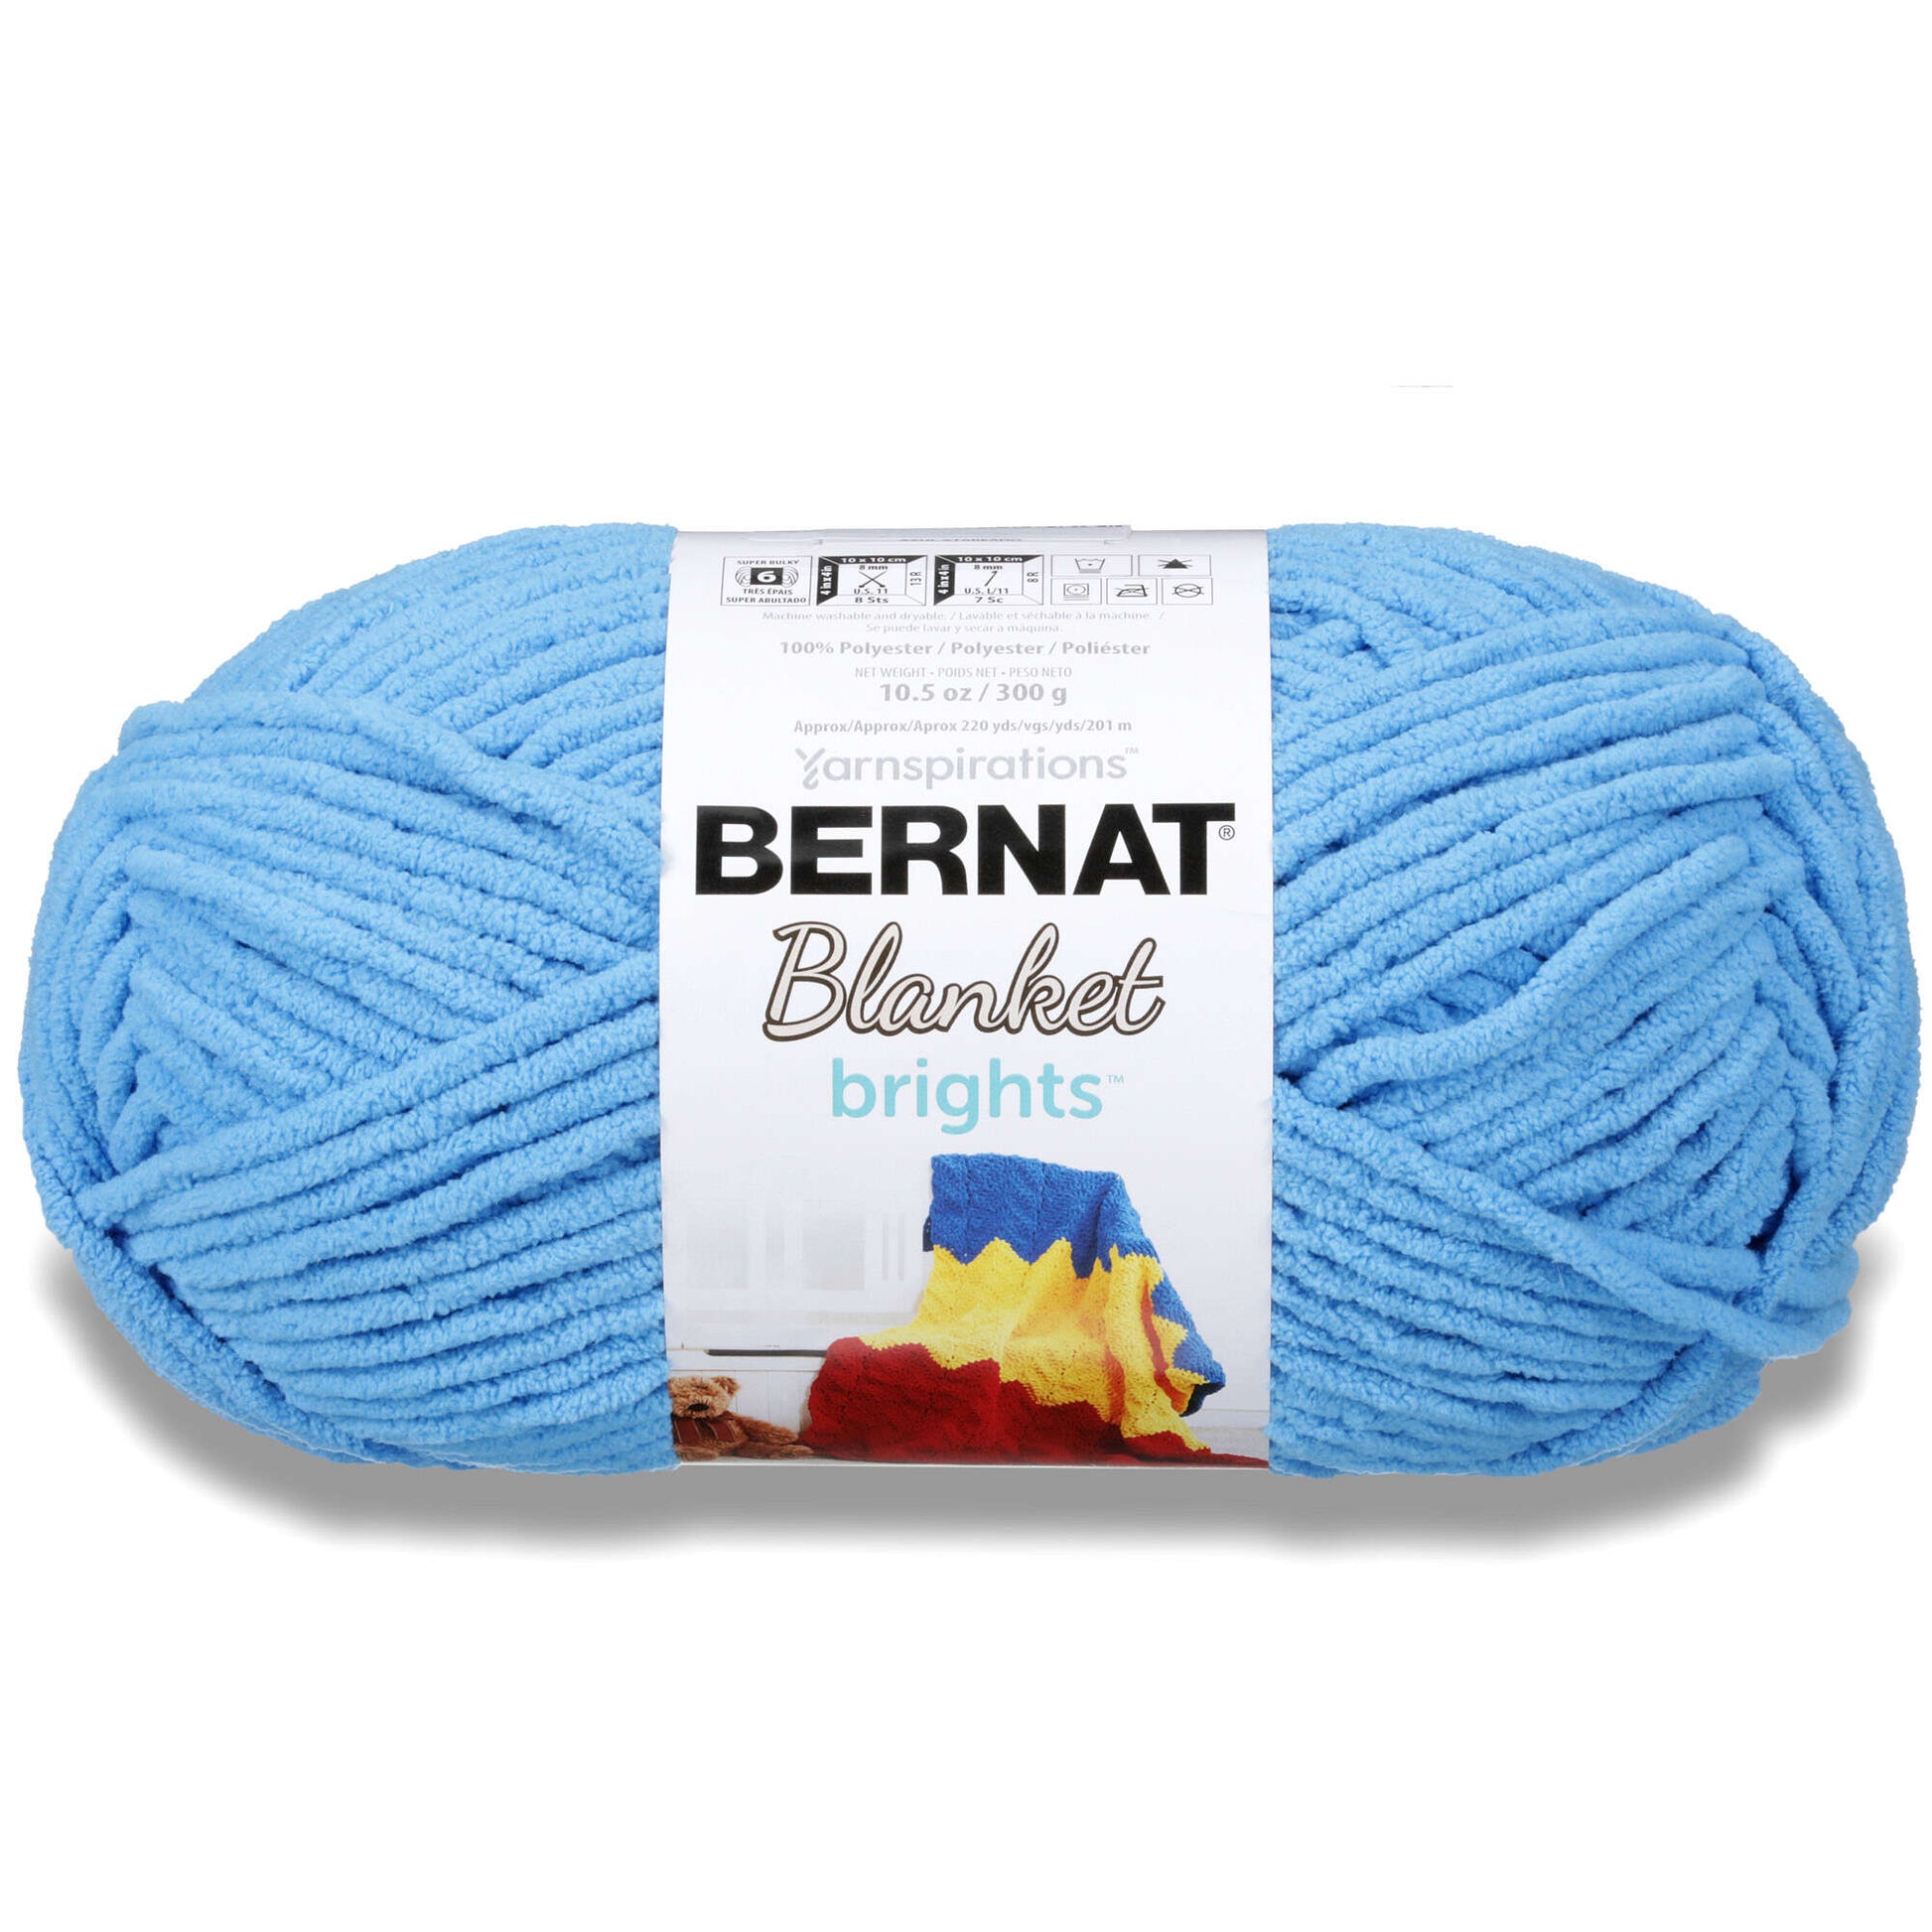 Bernat Blanket Brights Big Ball Yarn-Red, White & Boom Variegated, 1 count  - Fry's Food Stores